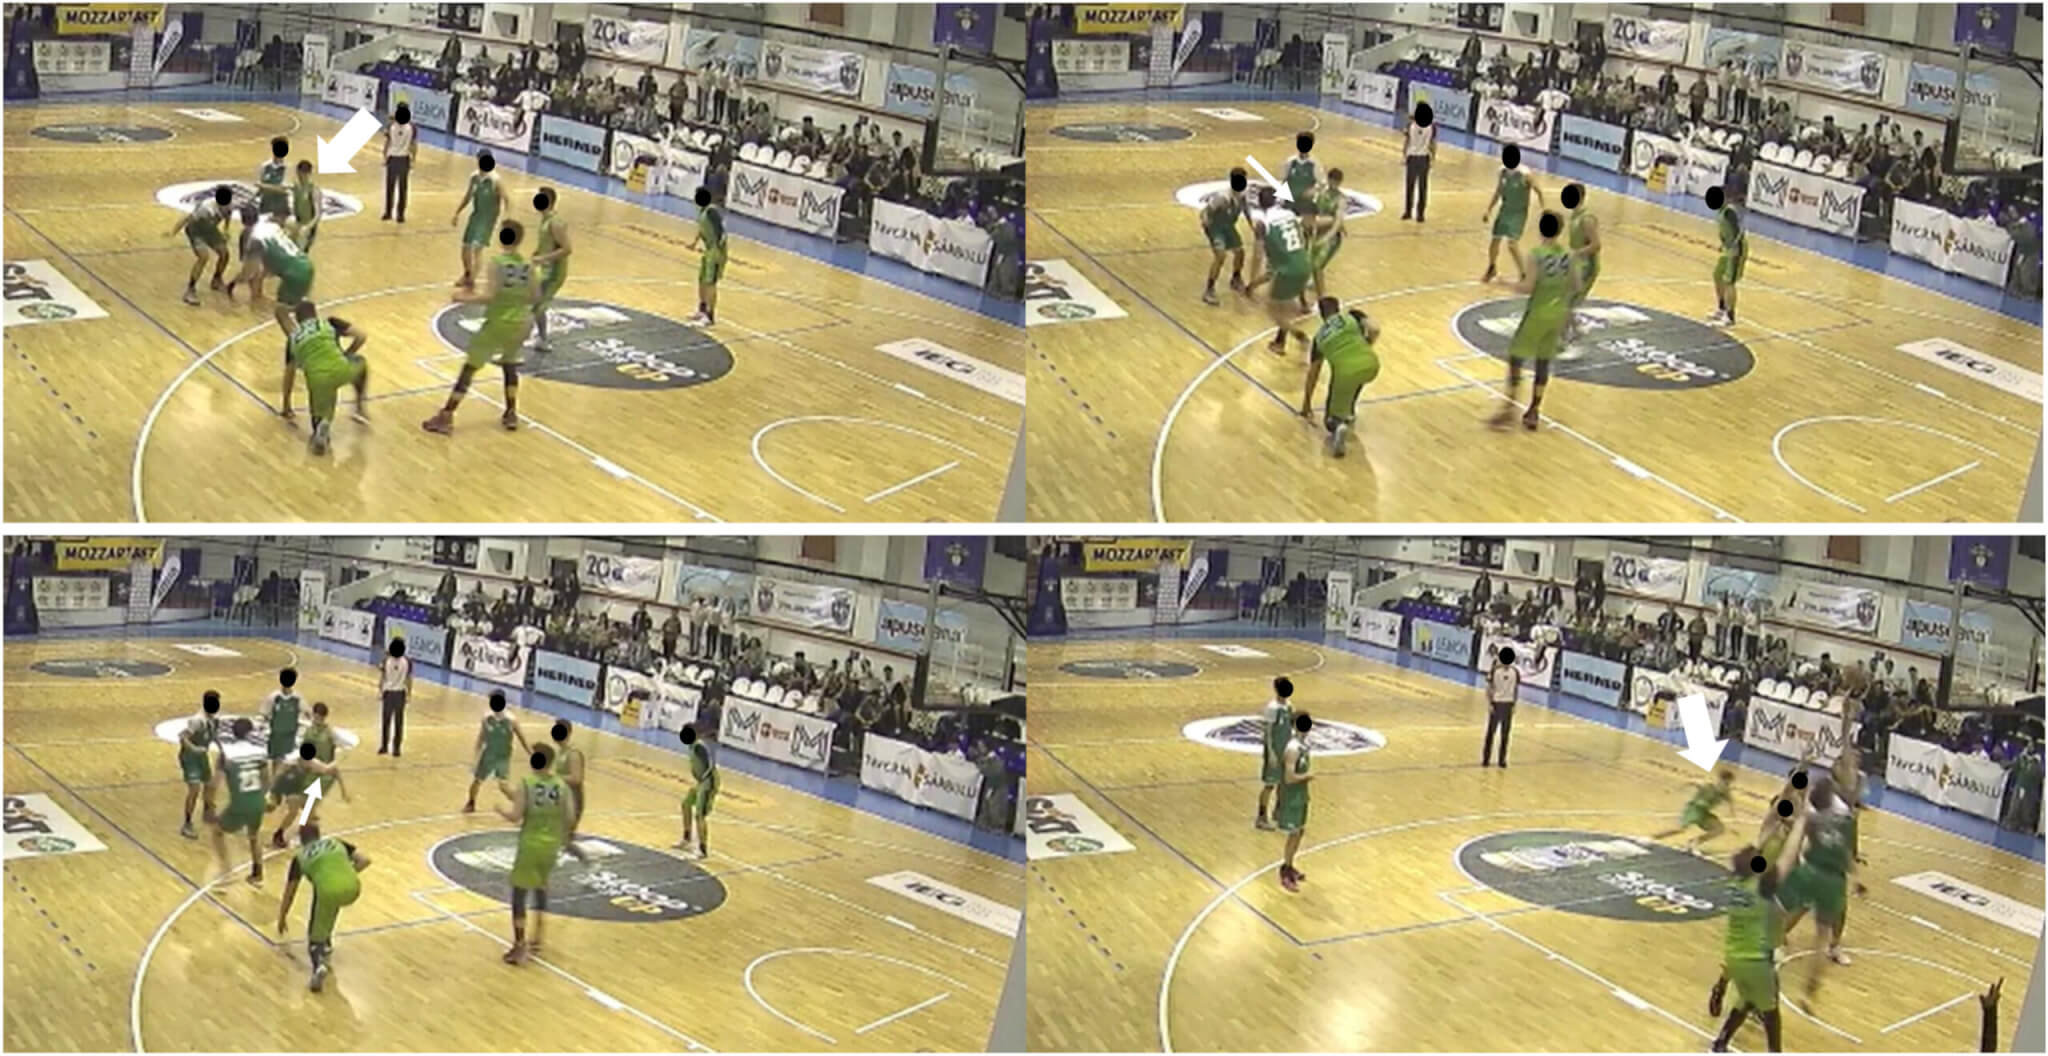 Commotio cordis event documented during a high school basketball game in Romania